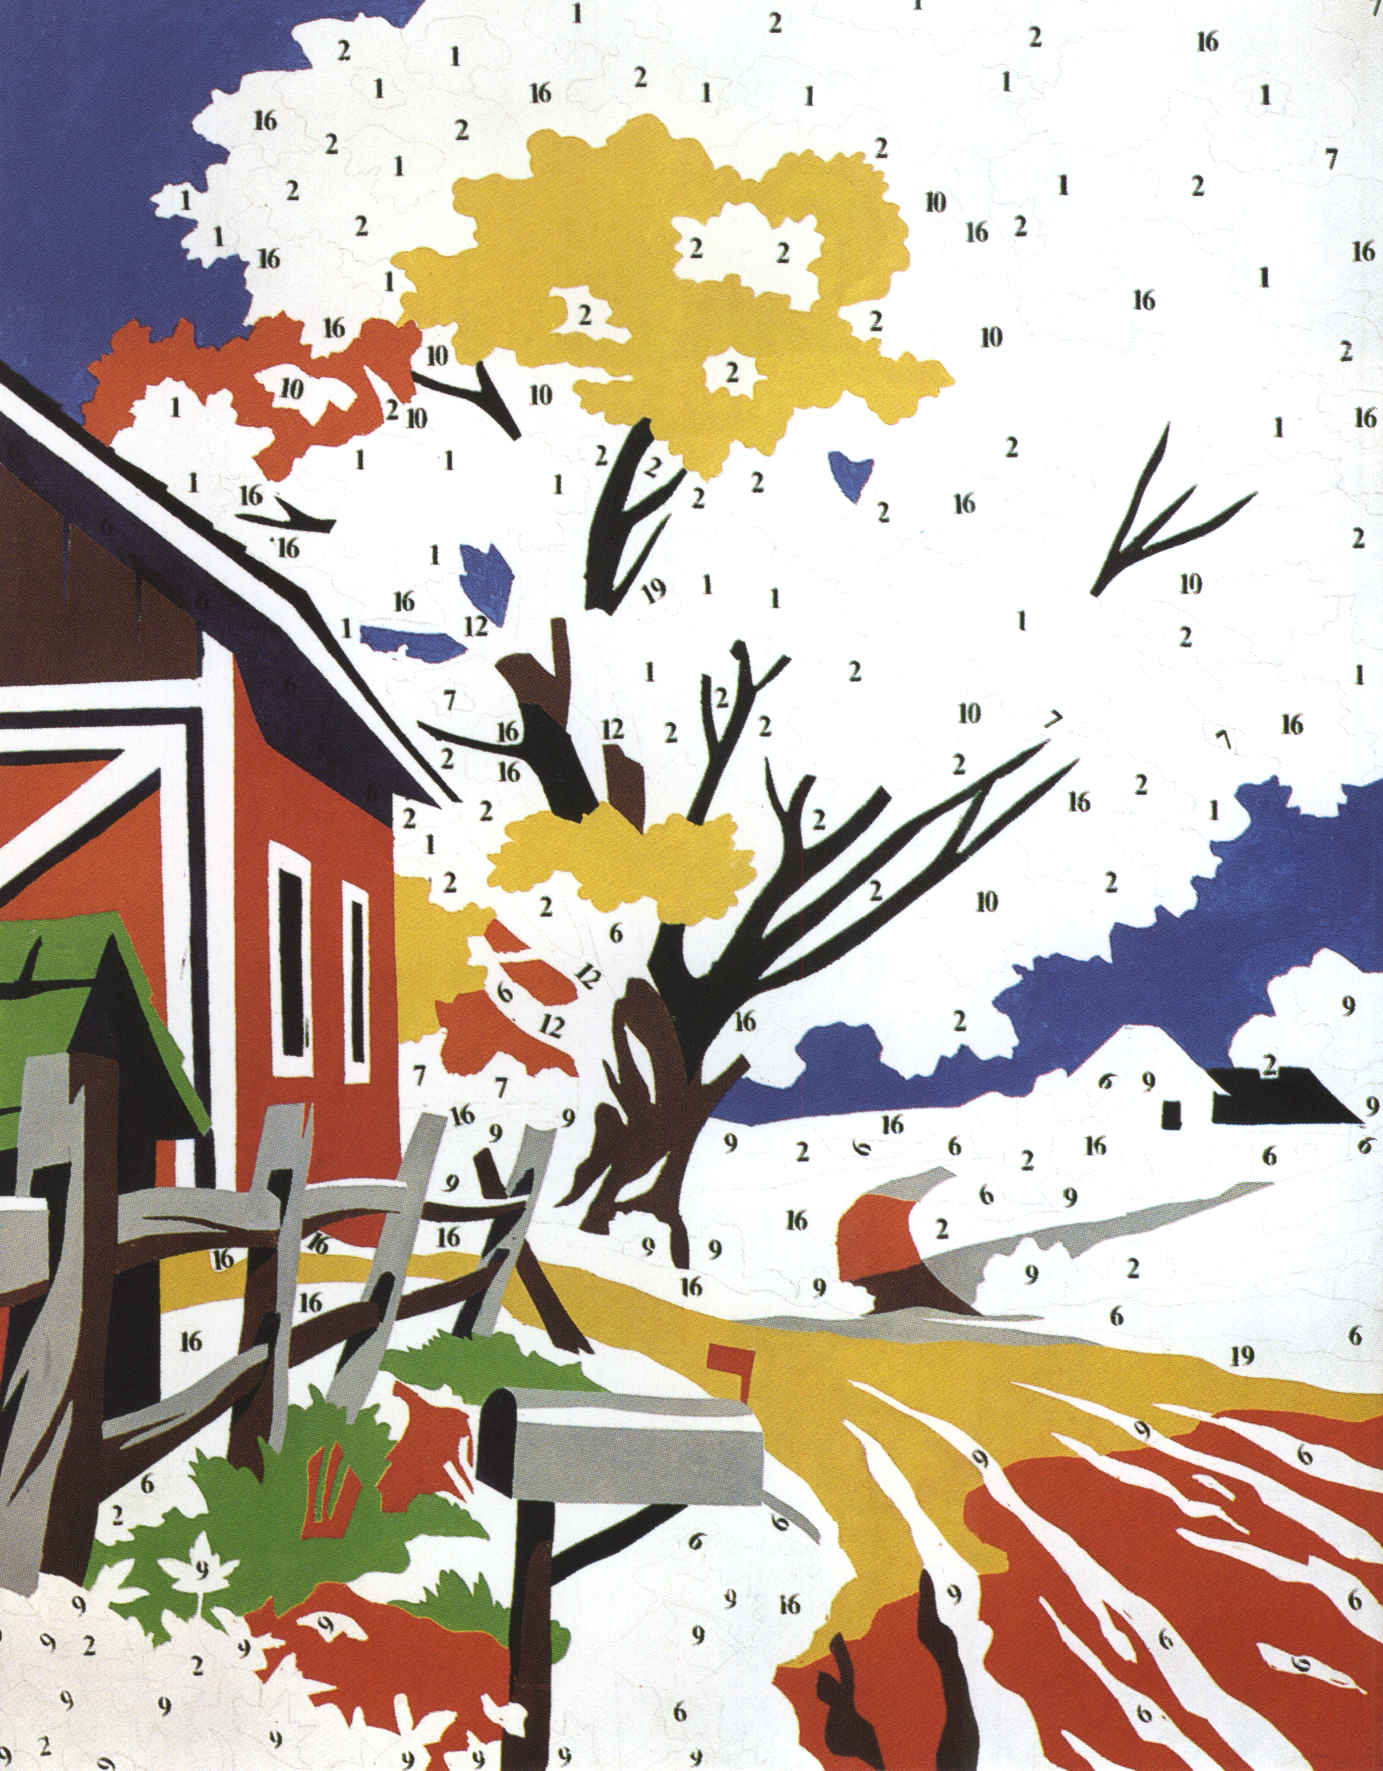 Artwork by Andy Warhol, Do it Yourself (Landscape), Made of Acrylic on canvas